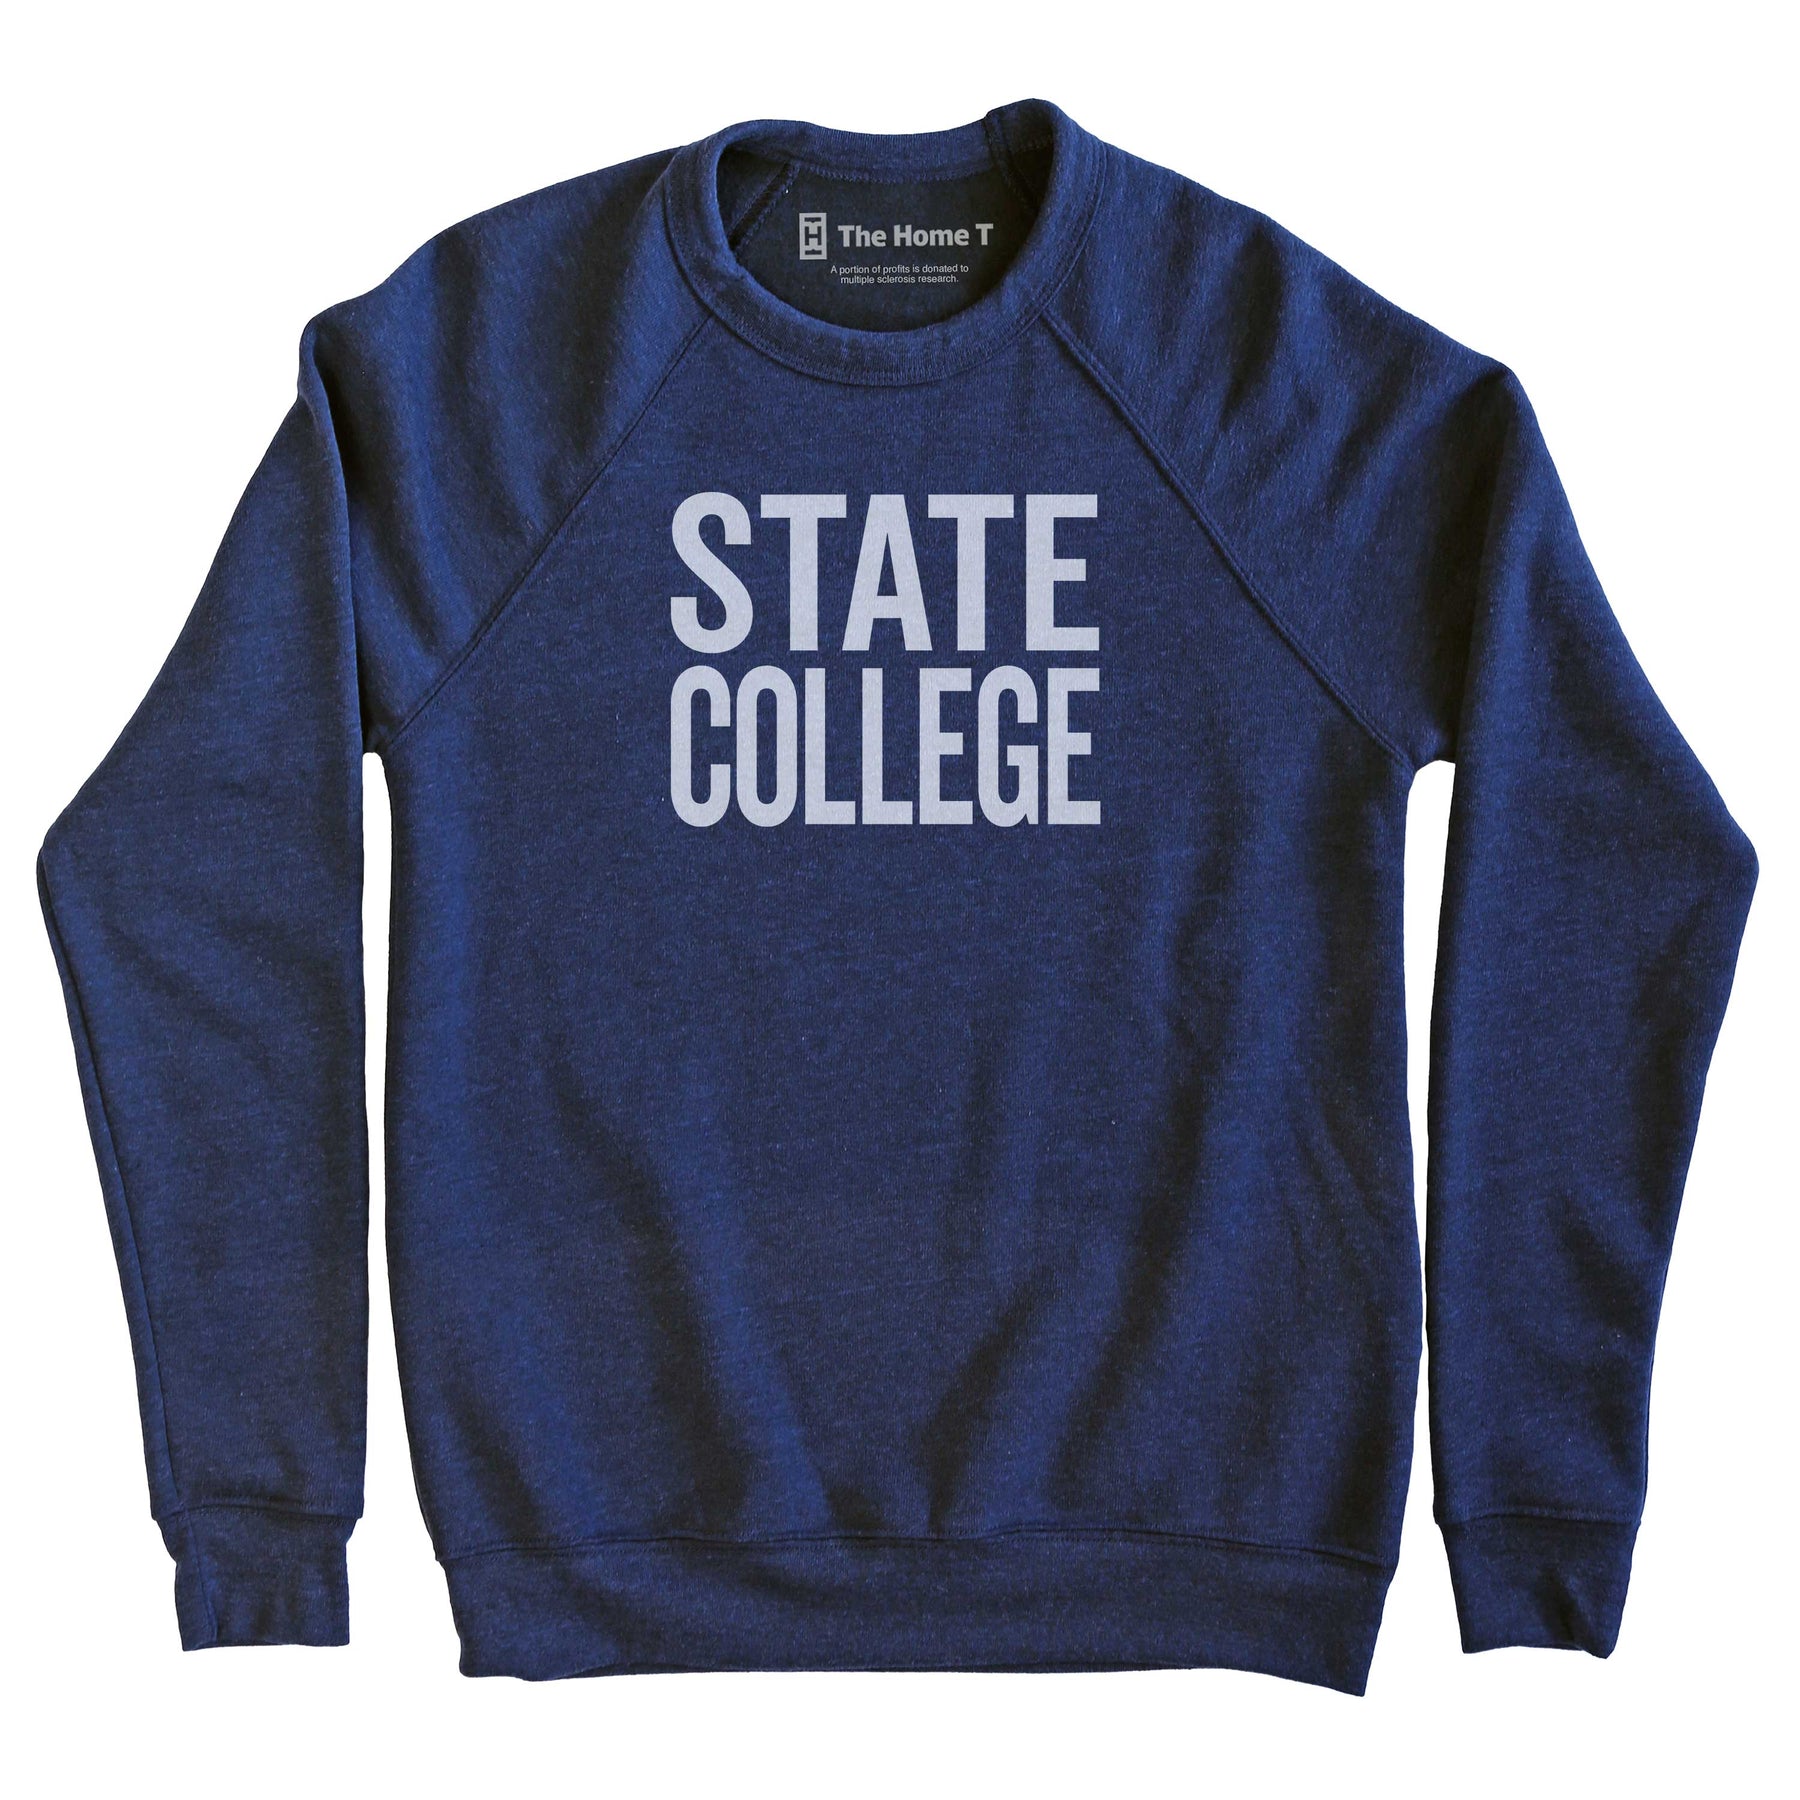 State College Crew neck The Home T XS Sweatshirt